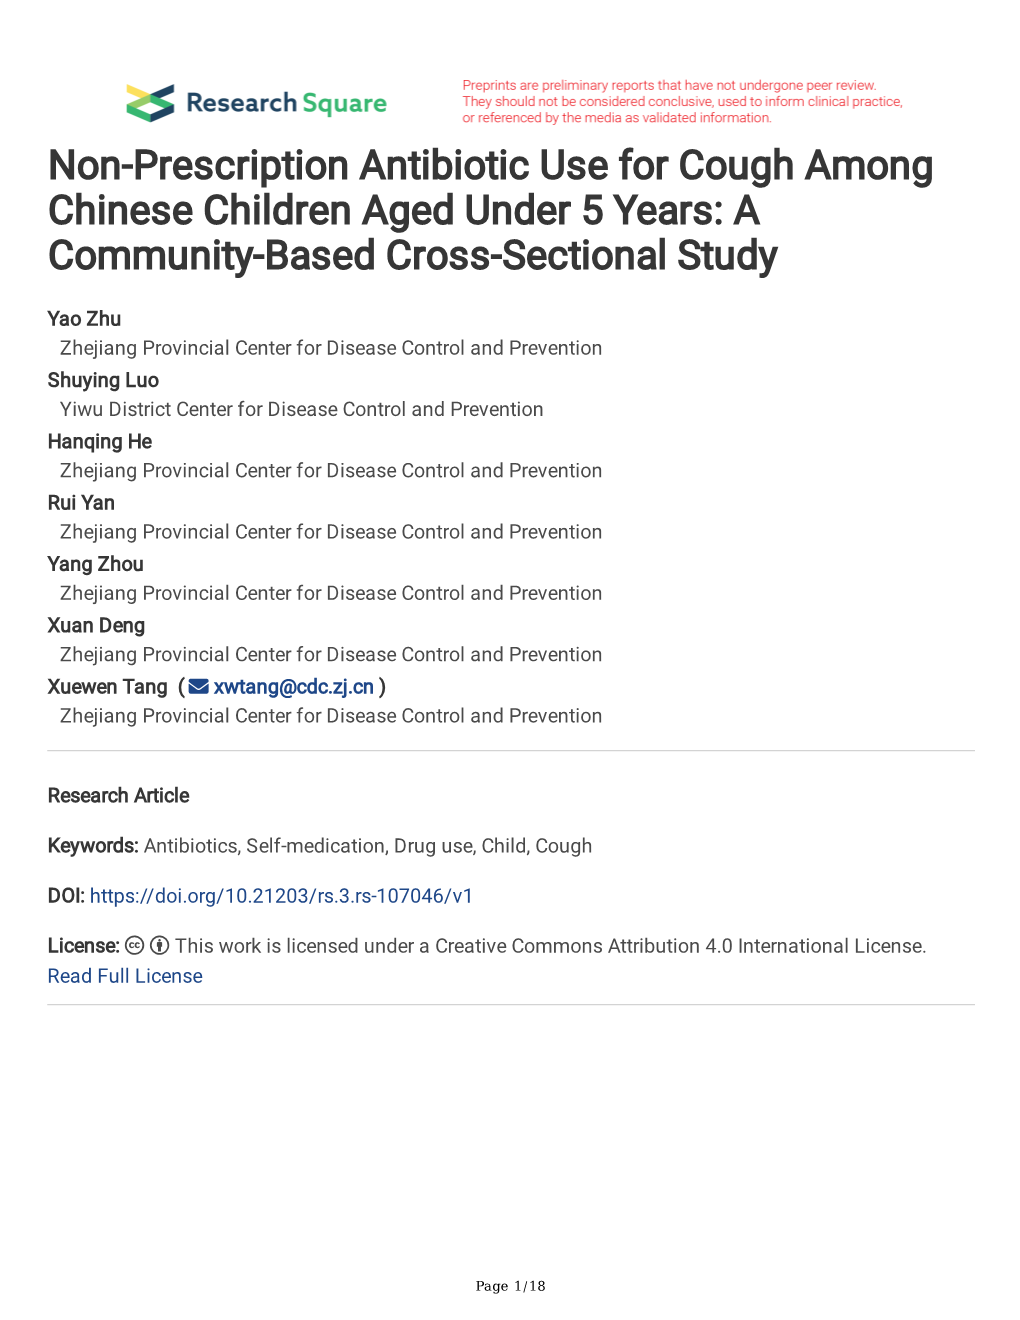 Non-Prescription Antibiotic Use for Cough Among Chinese Children Aged Under 5 Years: a Community-Based Cross-Sectional Study